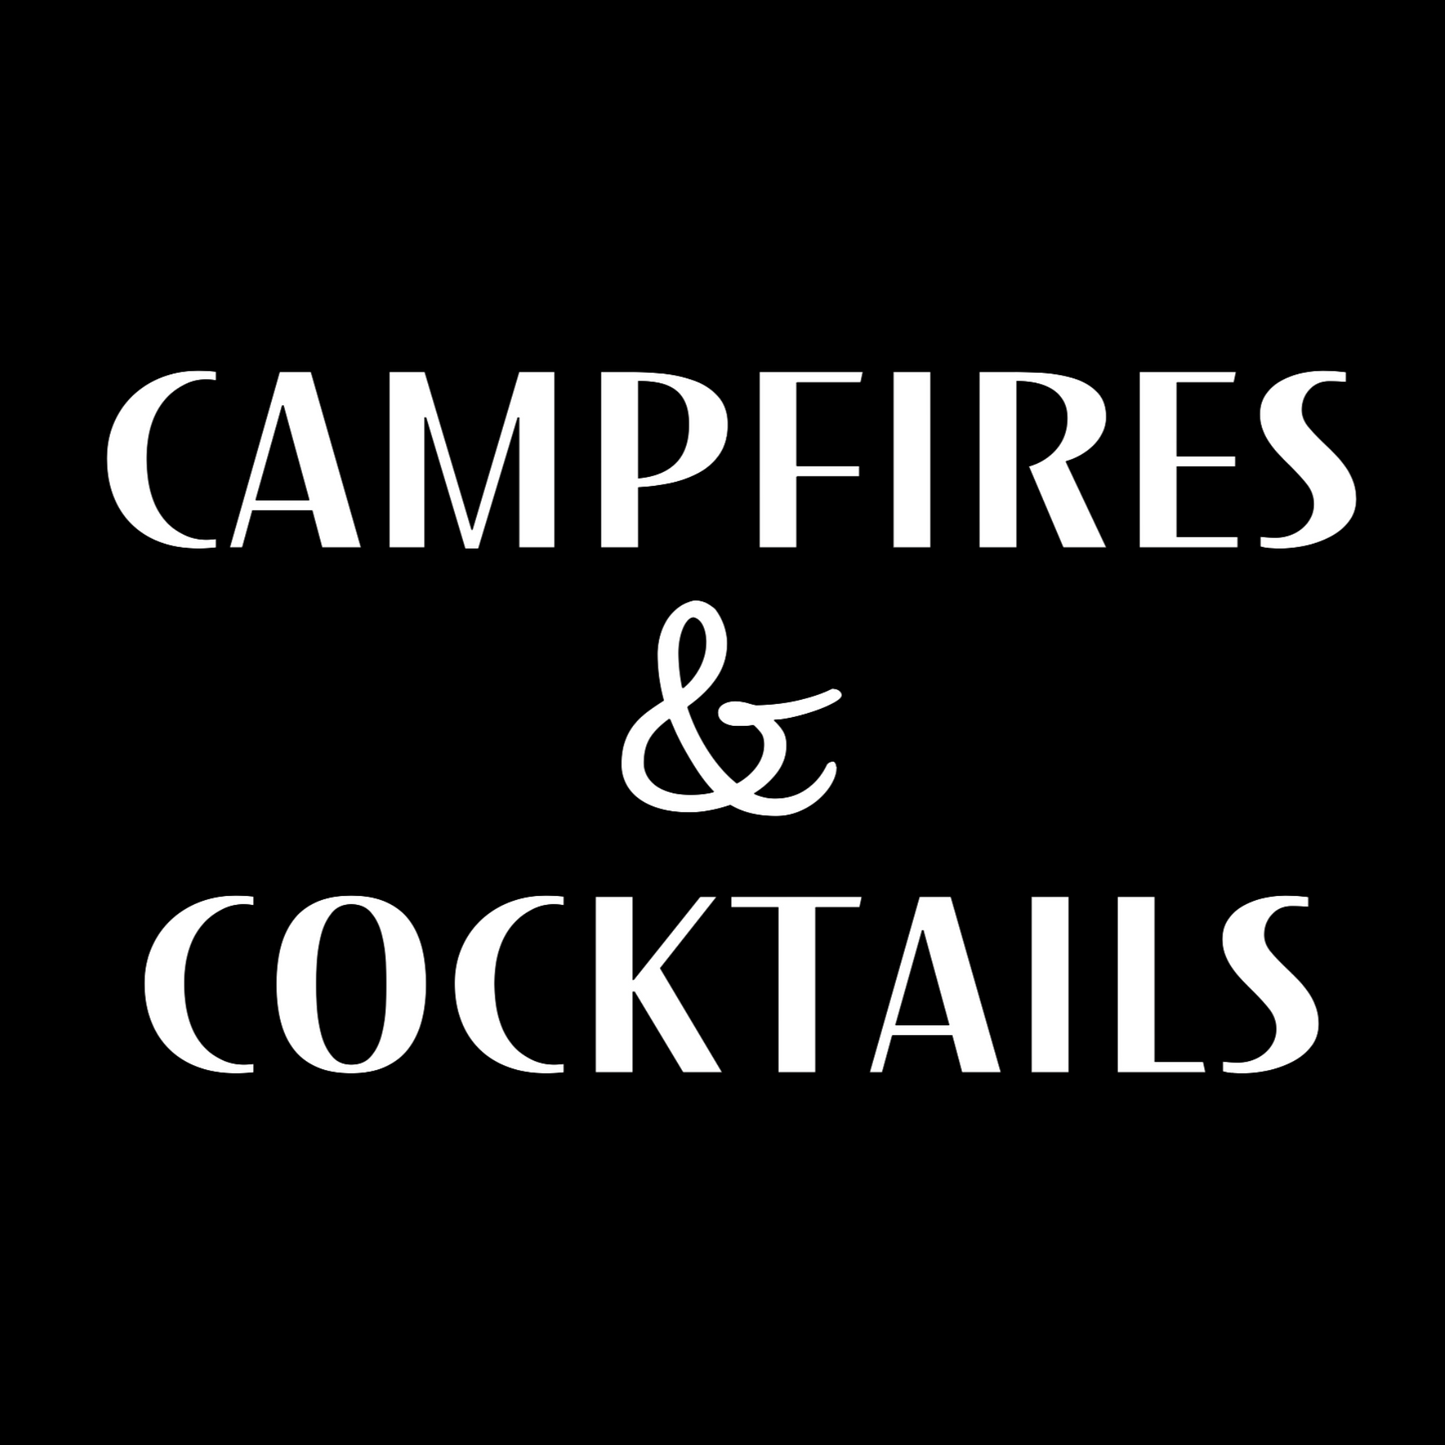 Campfires & Cocktails - Pull Over Sweatshirt. Black unisex crew neck pull over sweatshirt in a lightweight fabric with the saying "campfires & cocktails" in a bold white font. This is an image of the design in white on a black background.